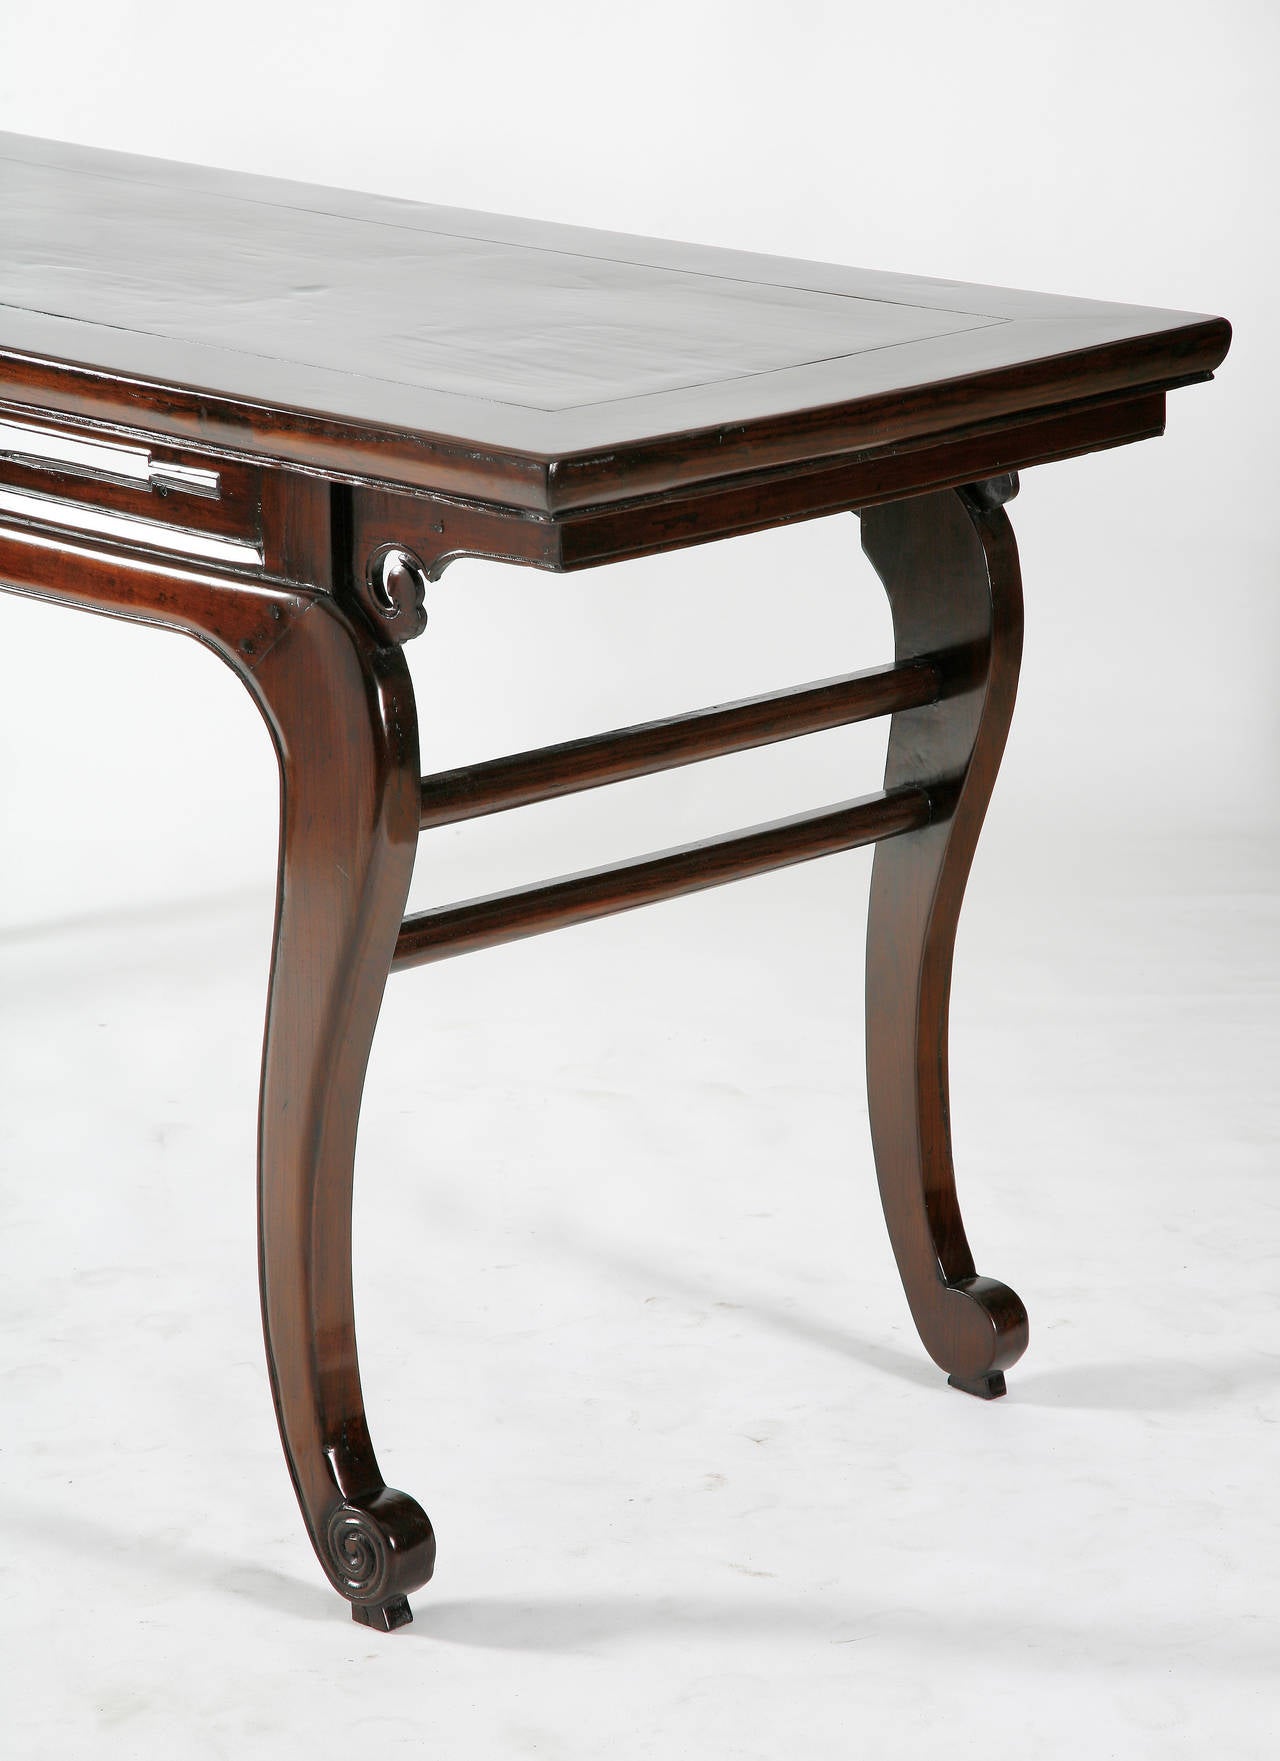 china cabriole table legs